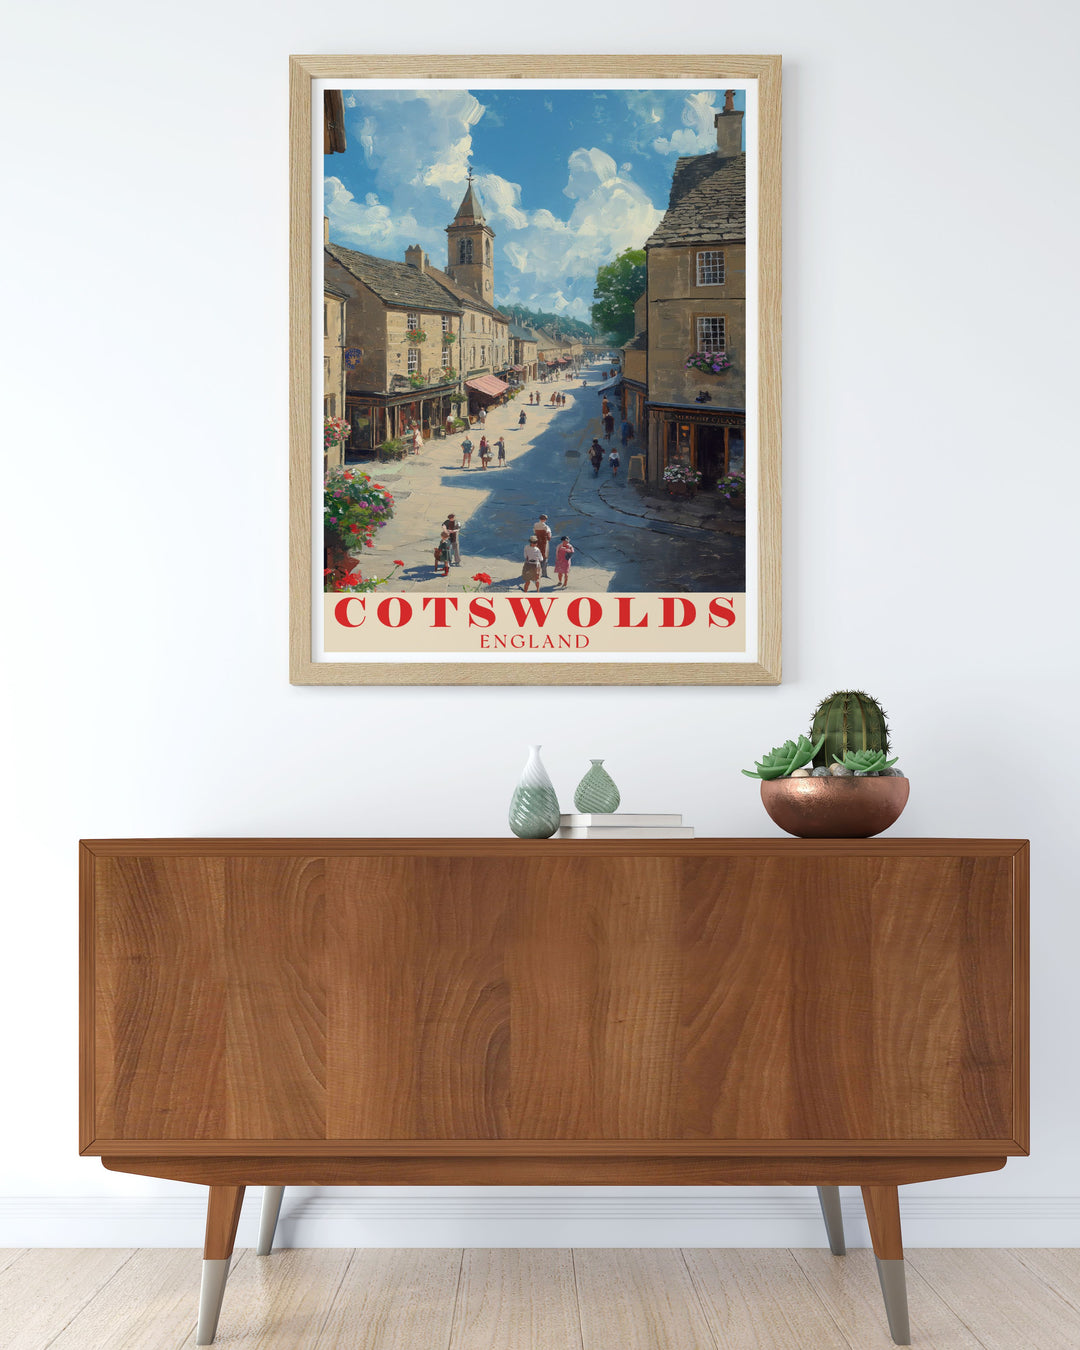 This poster showcases the enchanting landscapes of the Cotswolds and the charming architecture of Stow on the Wold Market Square, adding a unique touch of Englands historical and natural beauty to your living space.